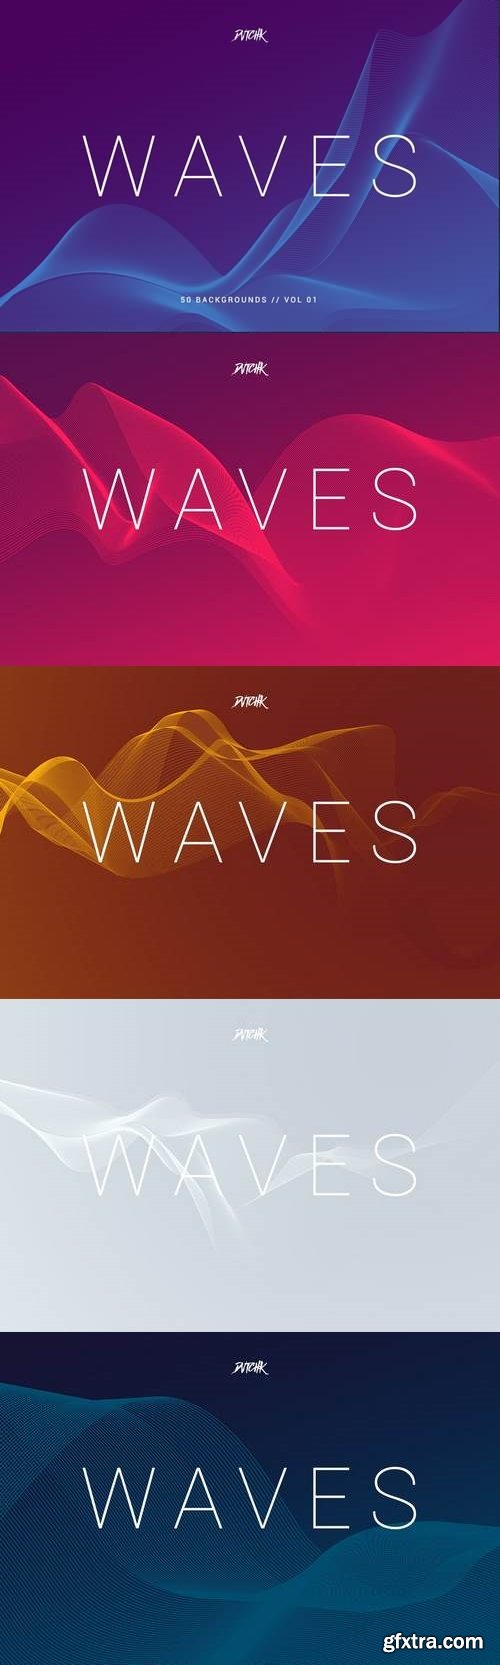 Waves | Network Lines Backgrounds | Vol. 01